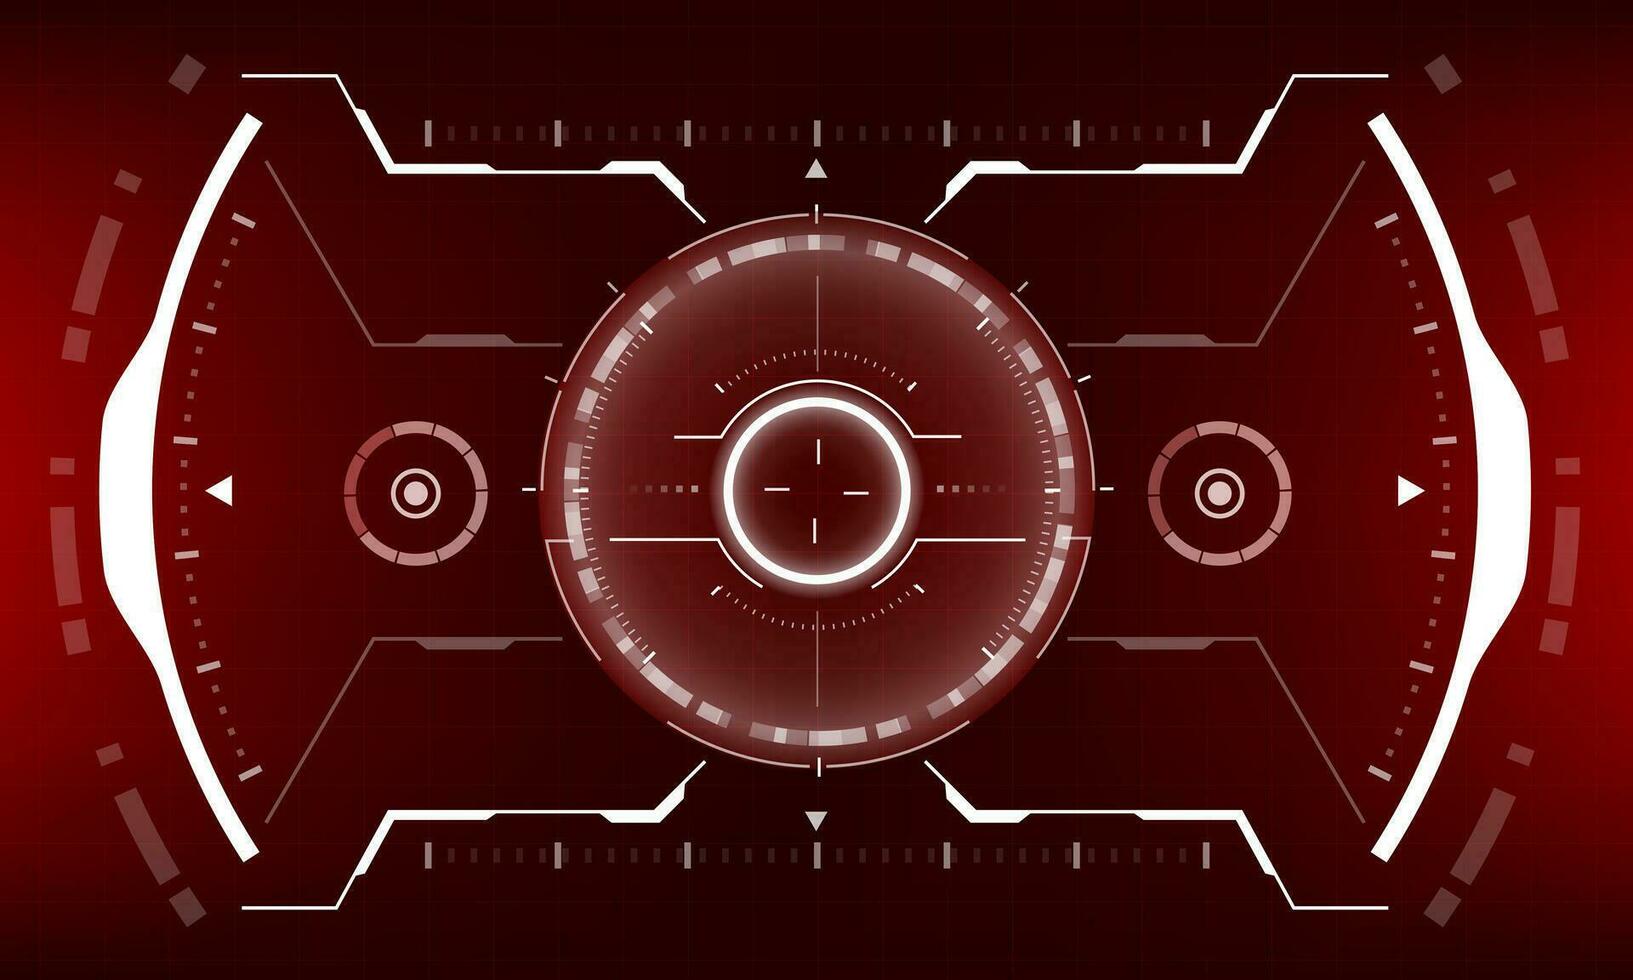 HUD sci-fi interface screen view white geometric on red design virtual reality futuristic technology creative display vector